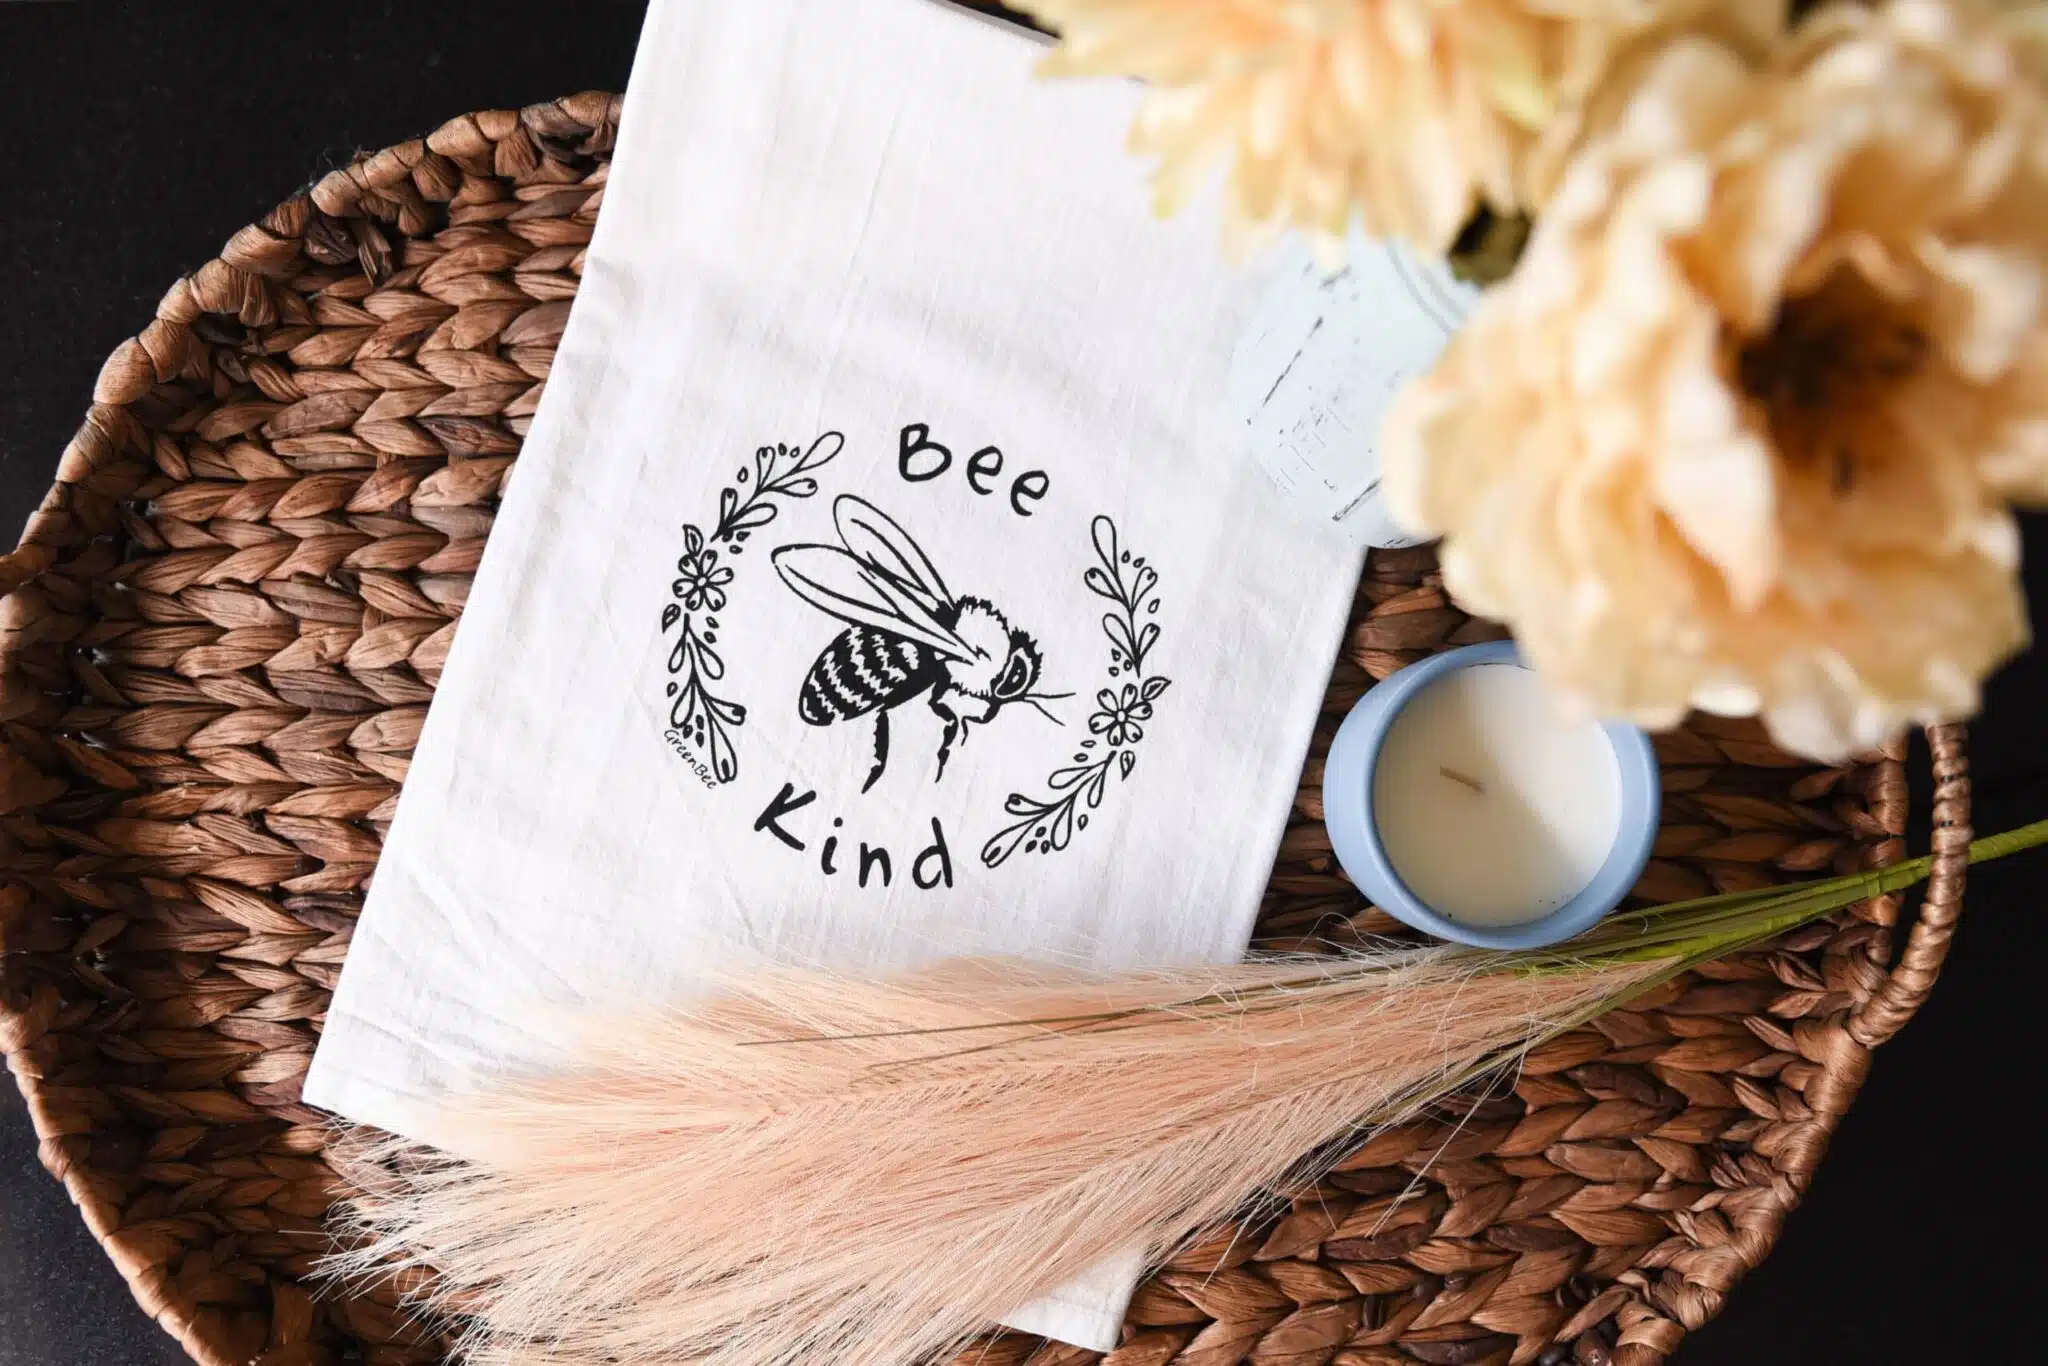 tea towel on a decorative try. tea towel says Bee kind with a floral band and a bee in the middle